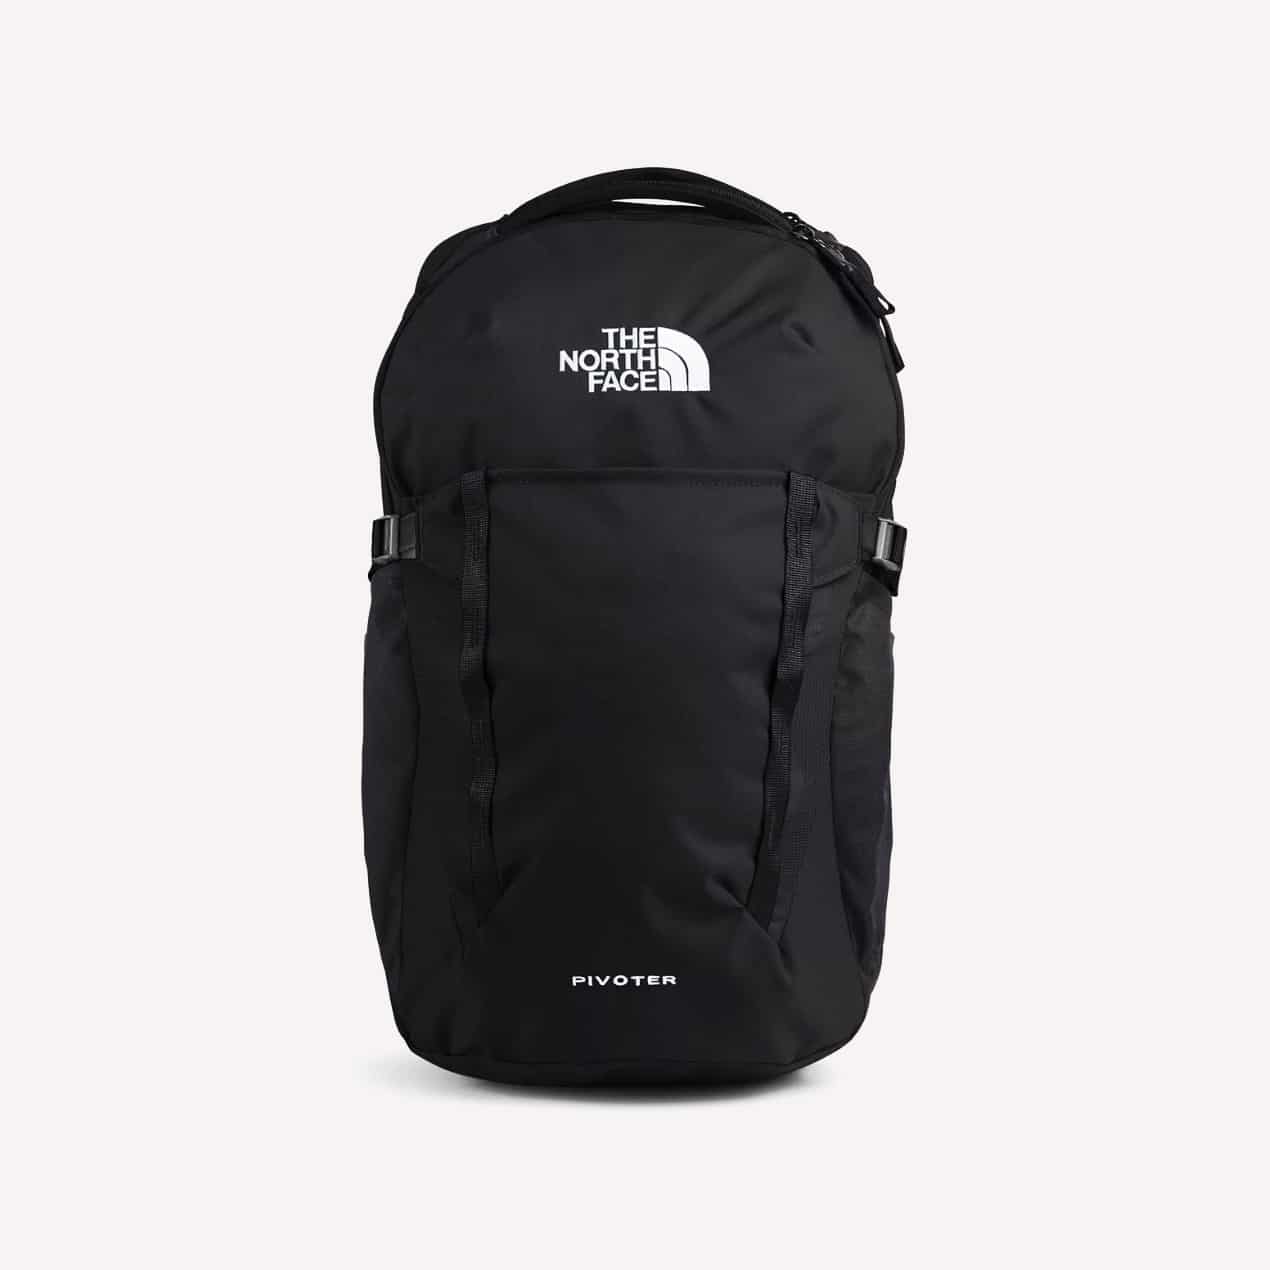 The North Face Pivoter Pack